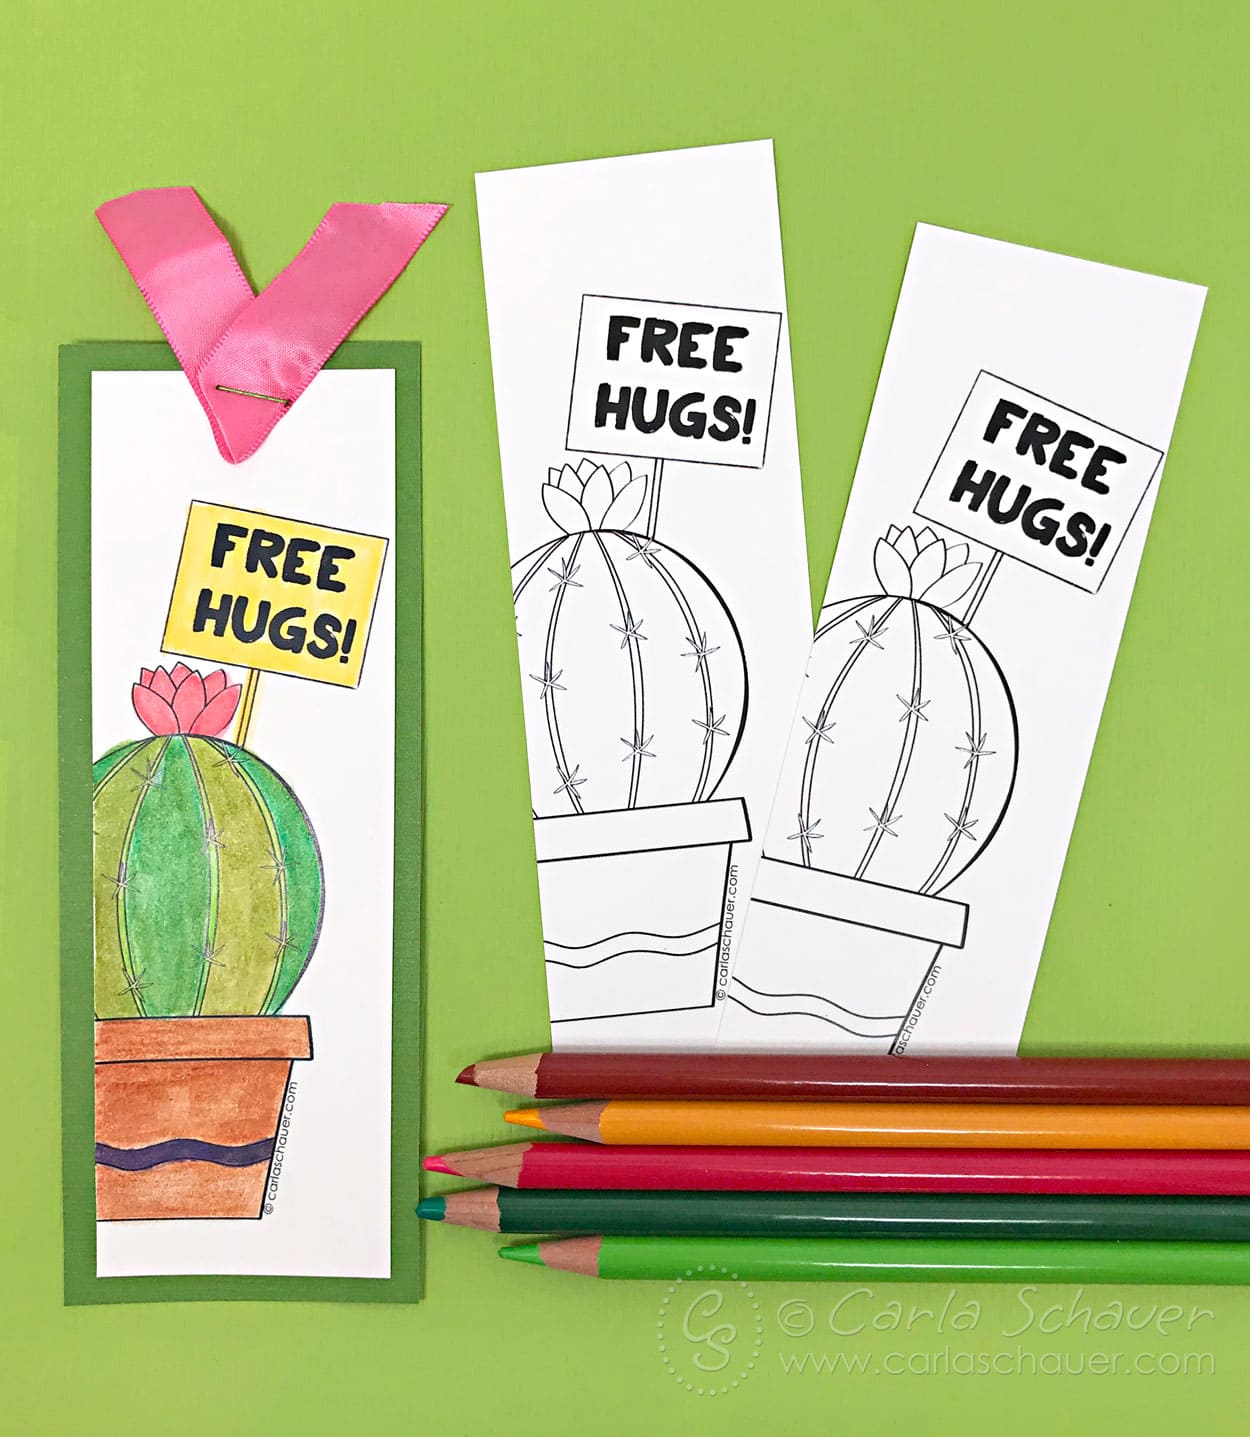 Hand-colored finished and plain diy cactus bookmarks with colored pencils on green background.